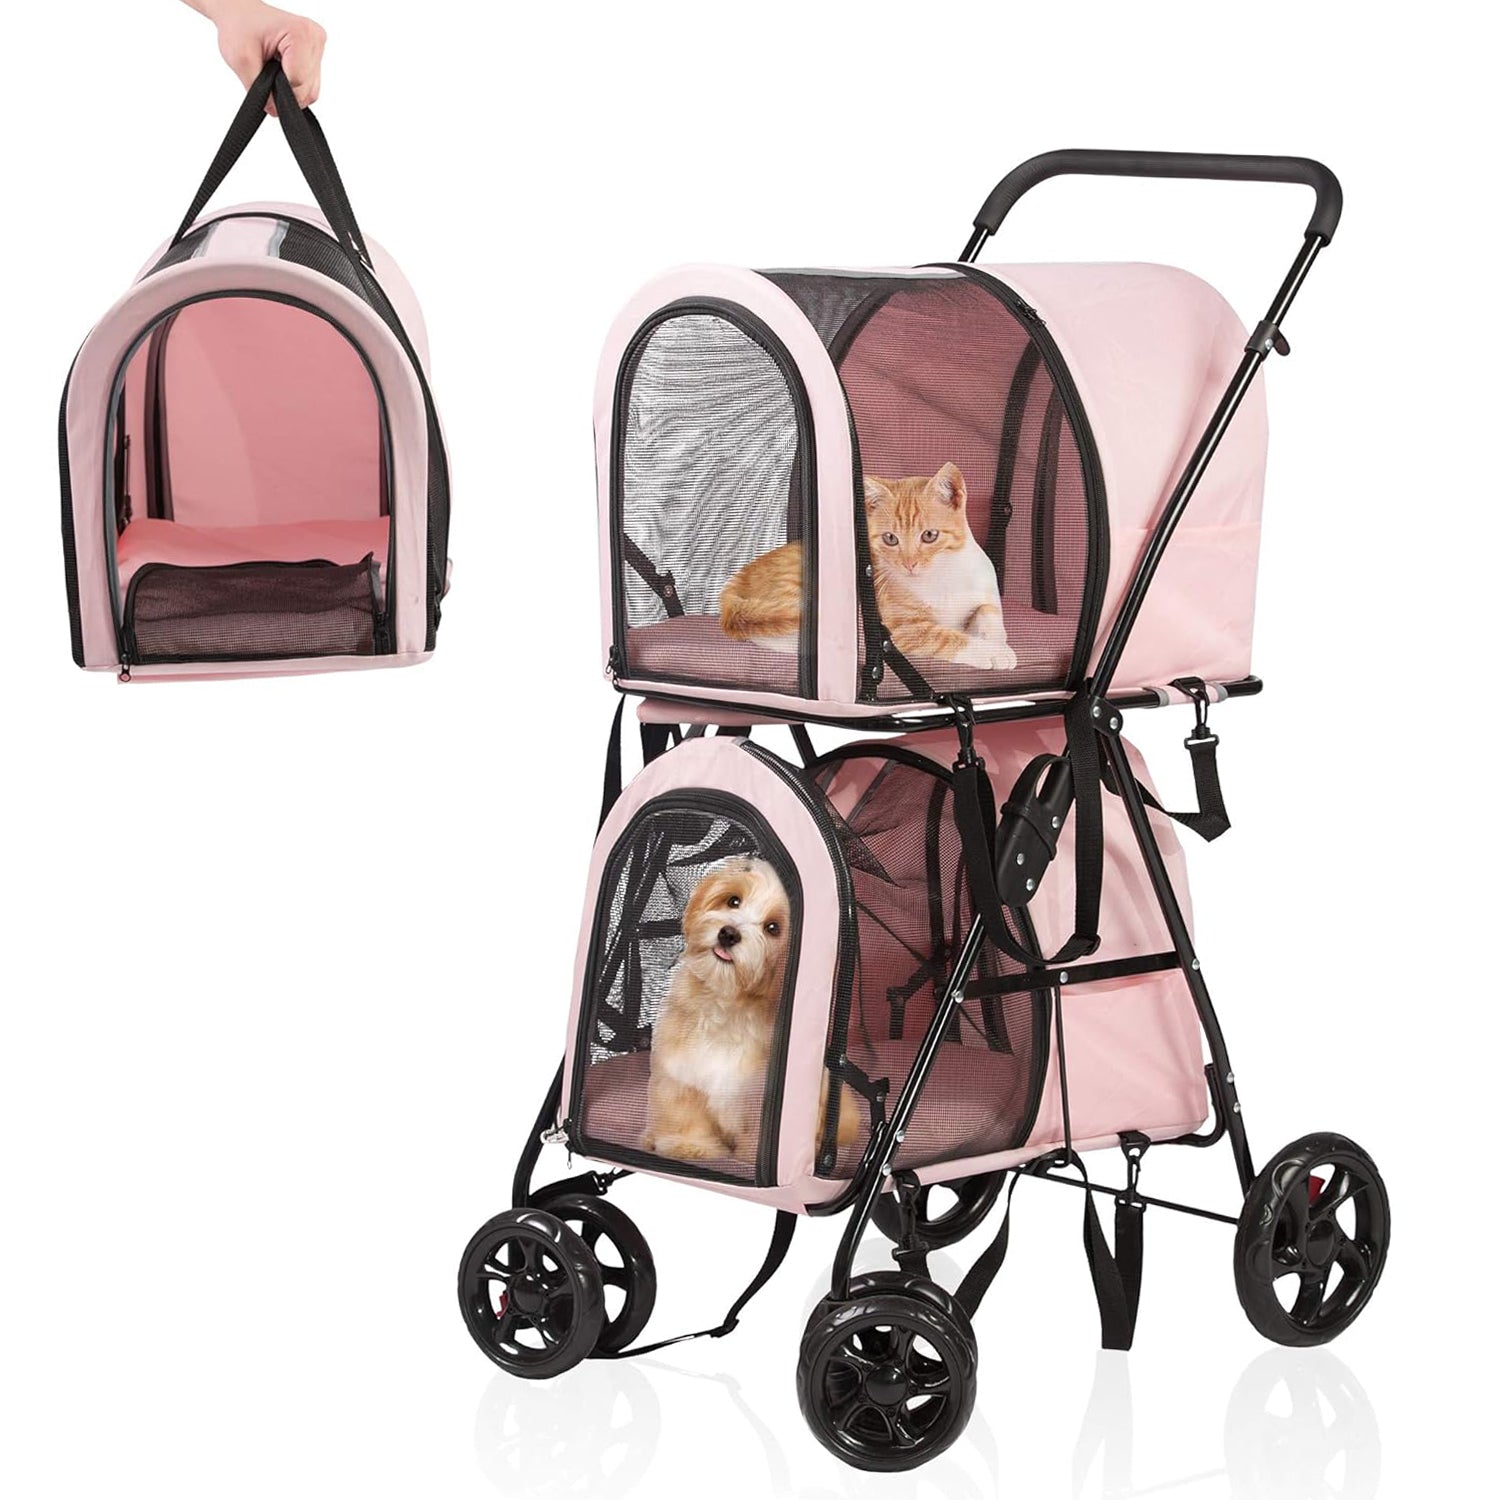 LUCKYERMORE 3-in-1 Double Seater Folding Dog Pet Stroller Kitten Puppy Carriages Detachable Carrier Bags, Pink